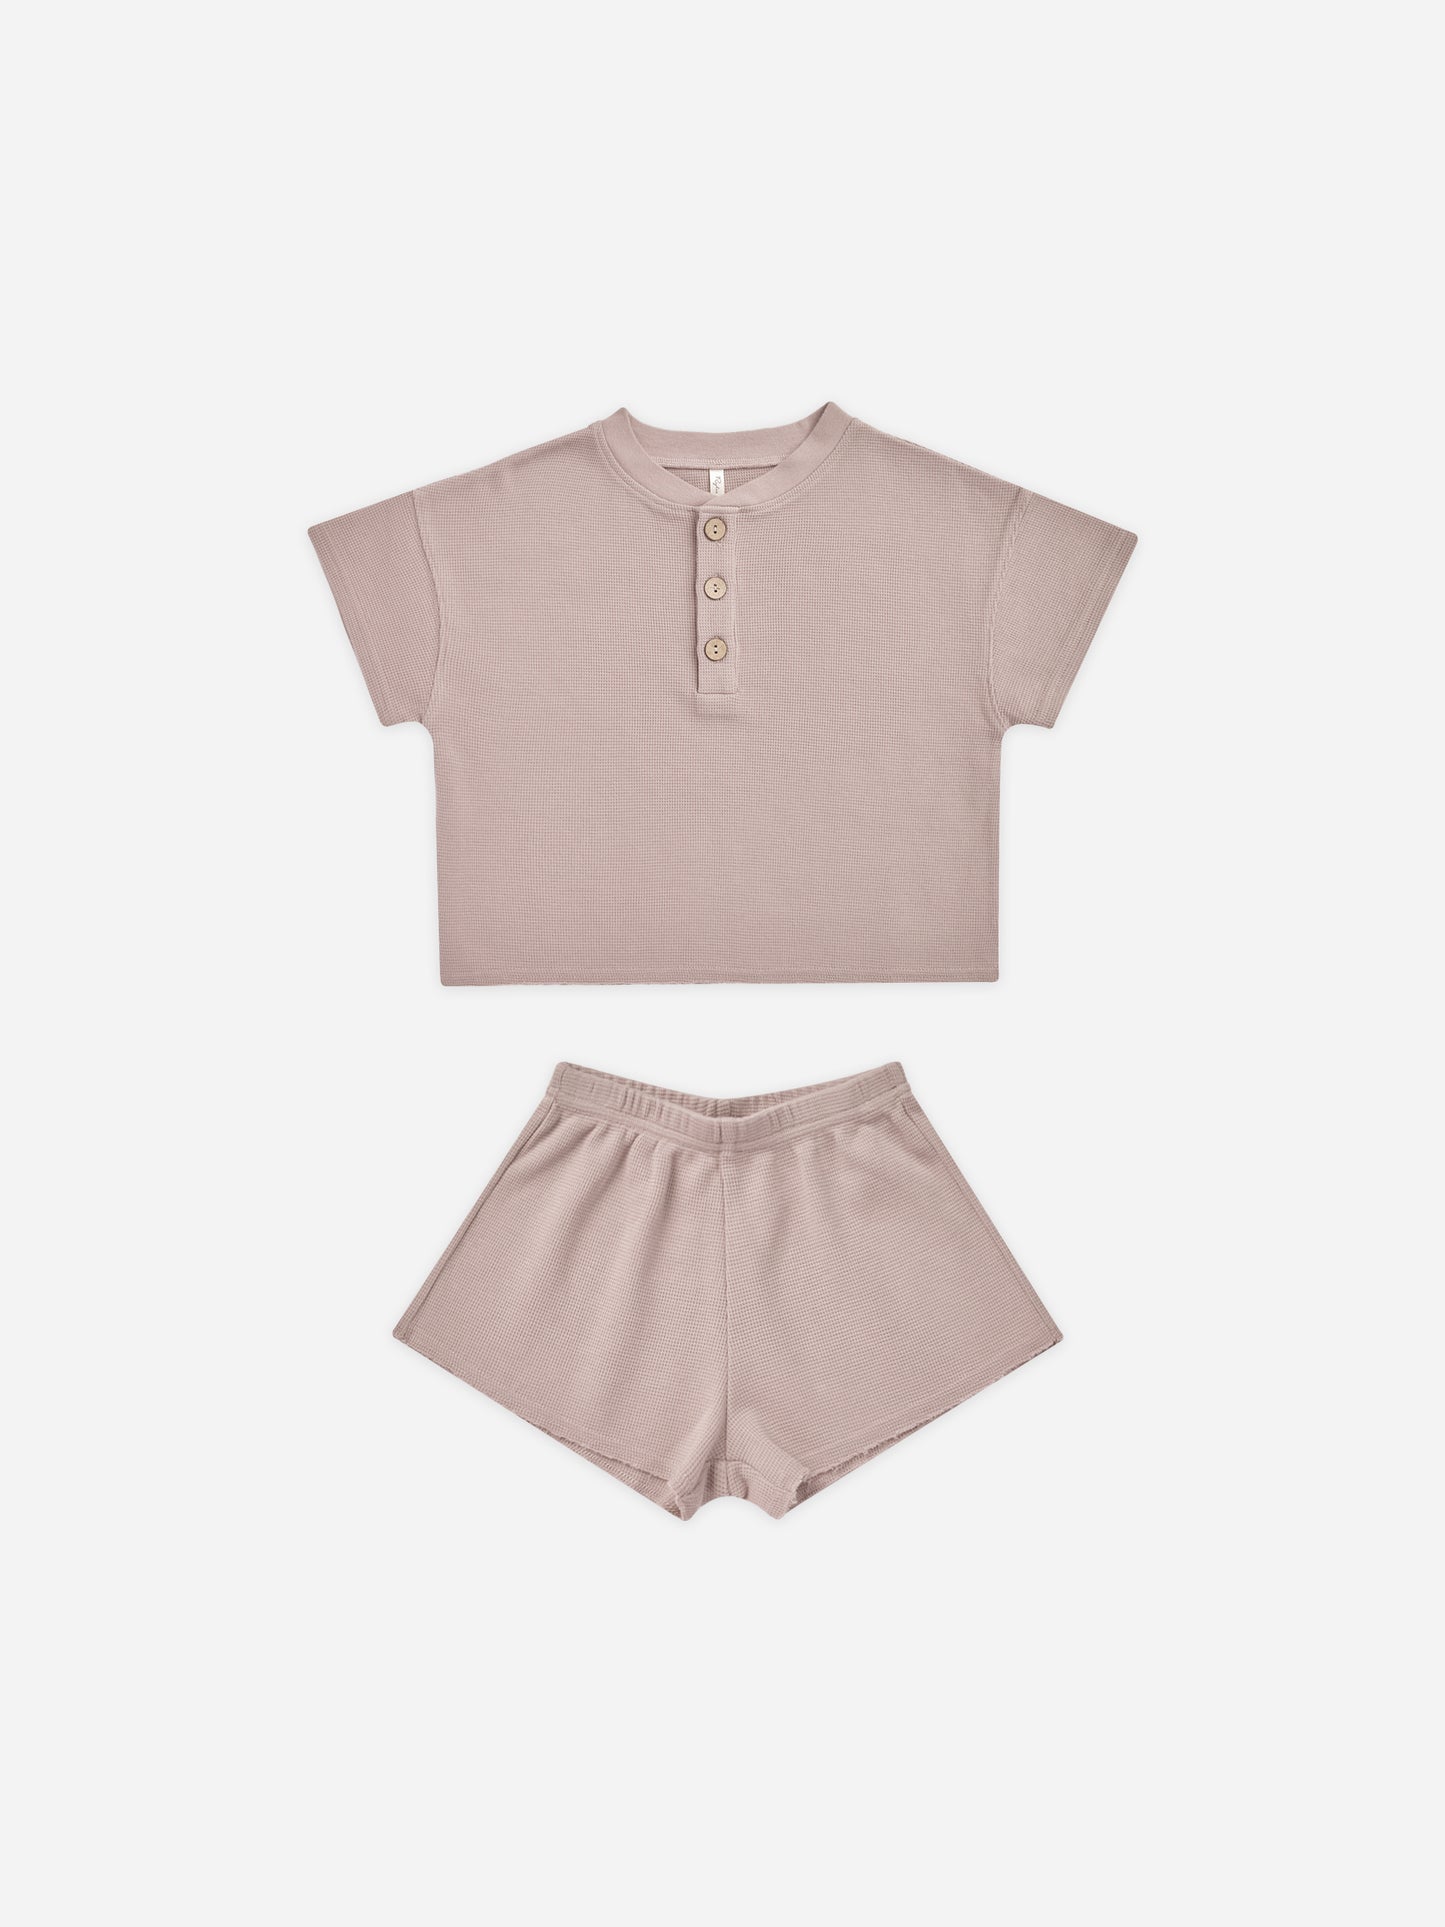 Summer Waffle Set || Mauve - Rylee + Cru | Kids Clothes | Trendy Baby Clothes | Modern Infant Outfits |